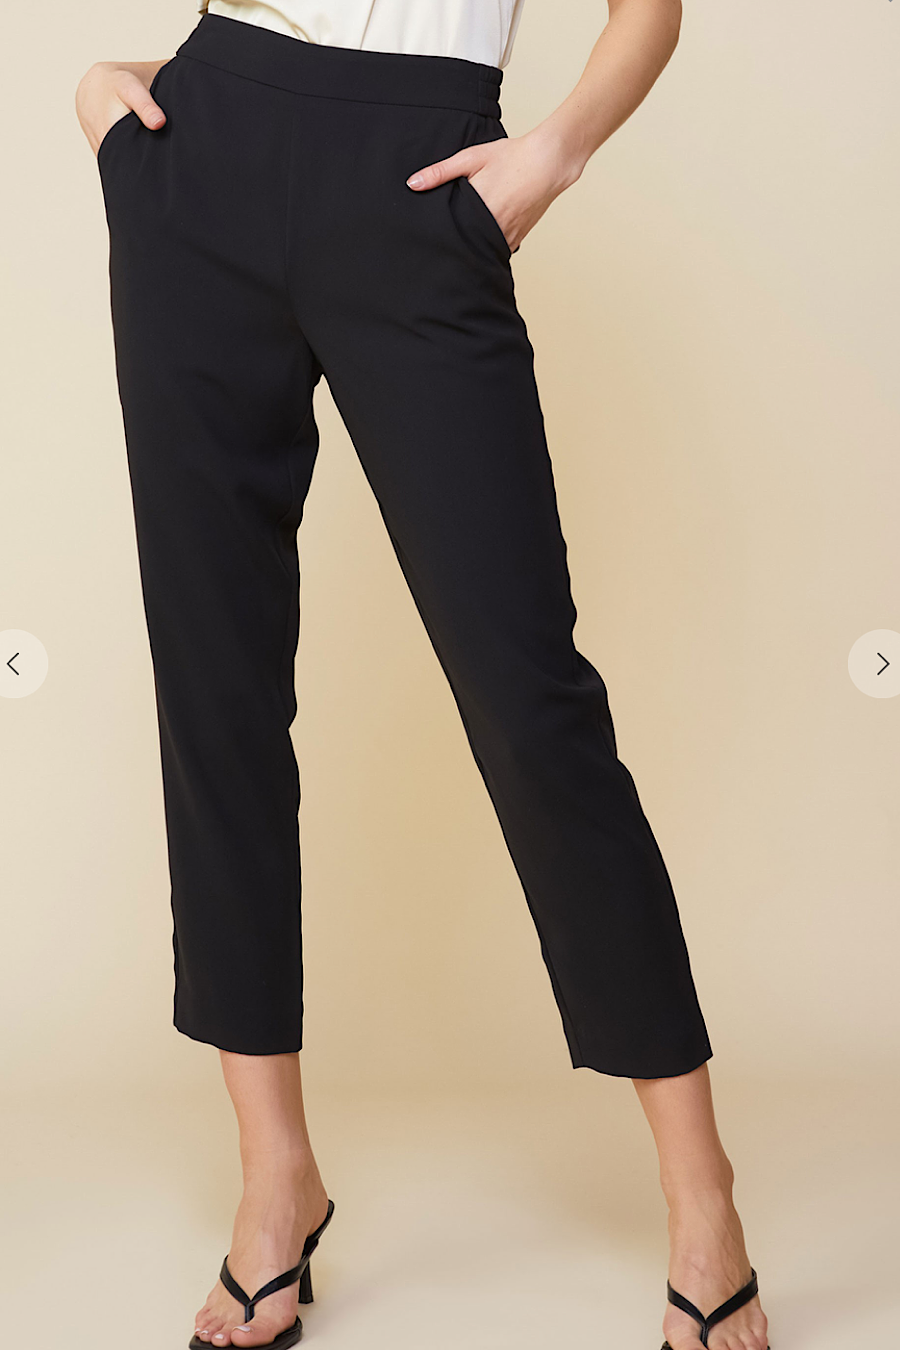 Act Professional Tapered Dress Pants